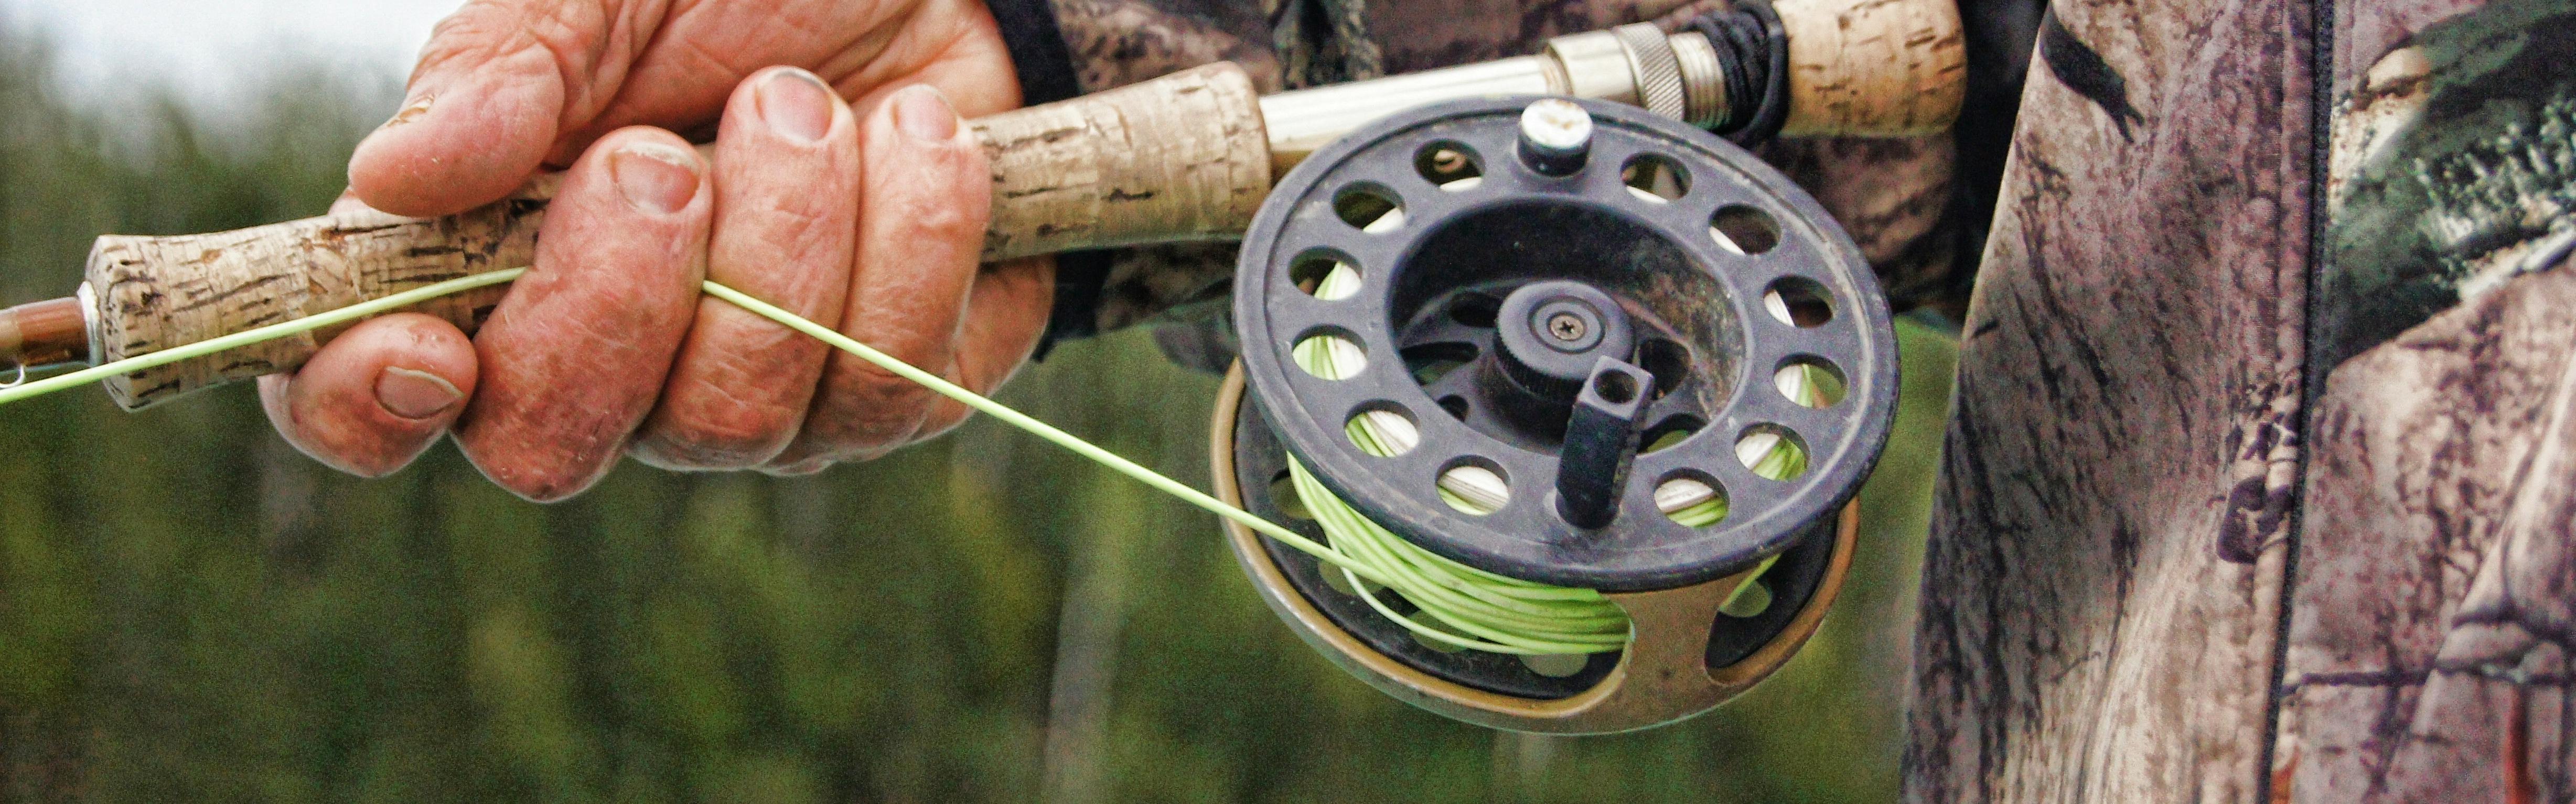 How to Build a Fly Rod at Home